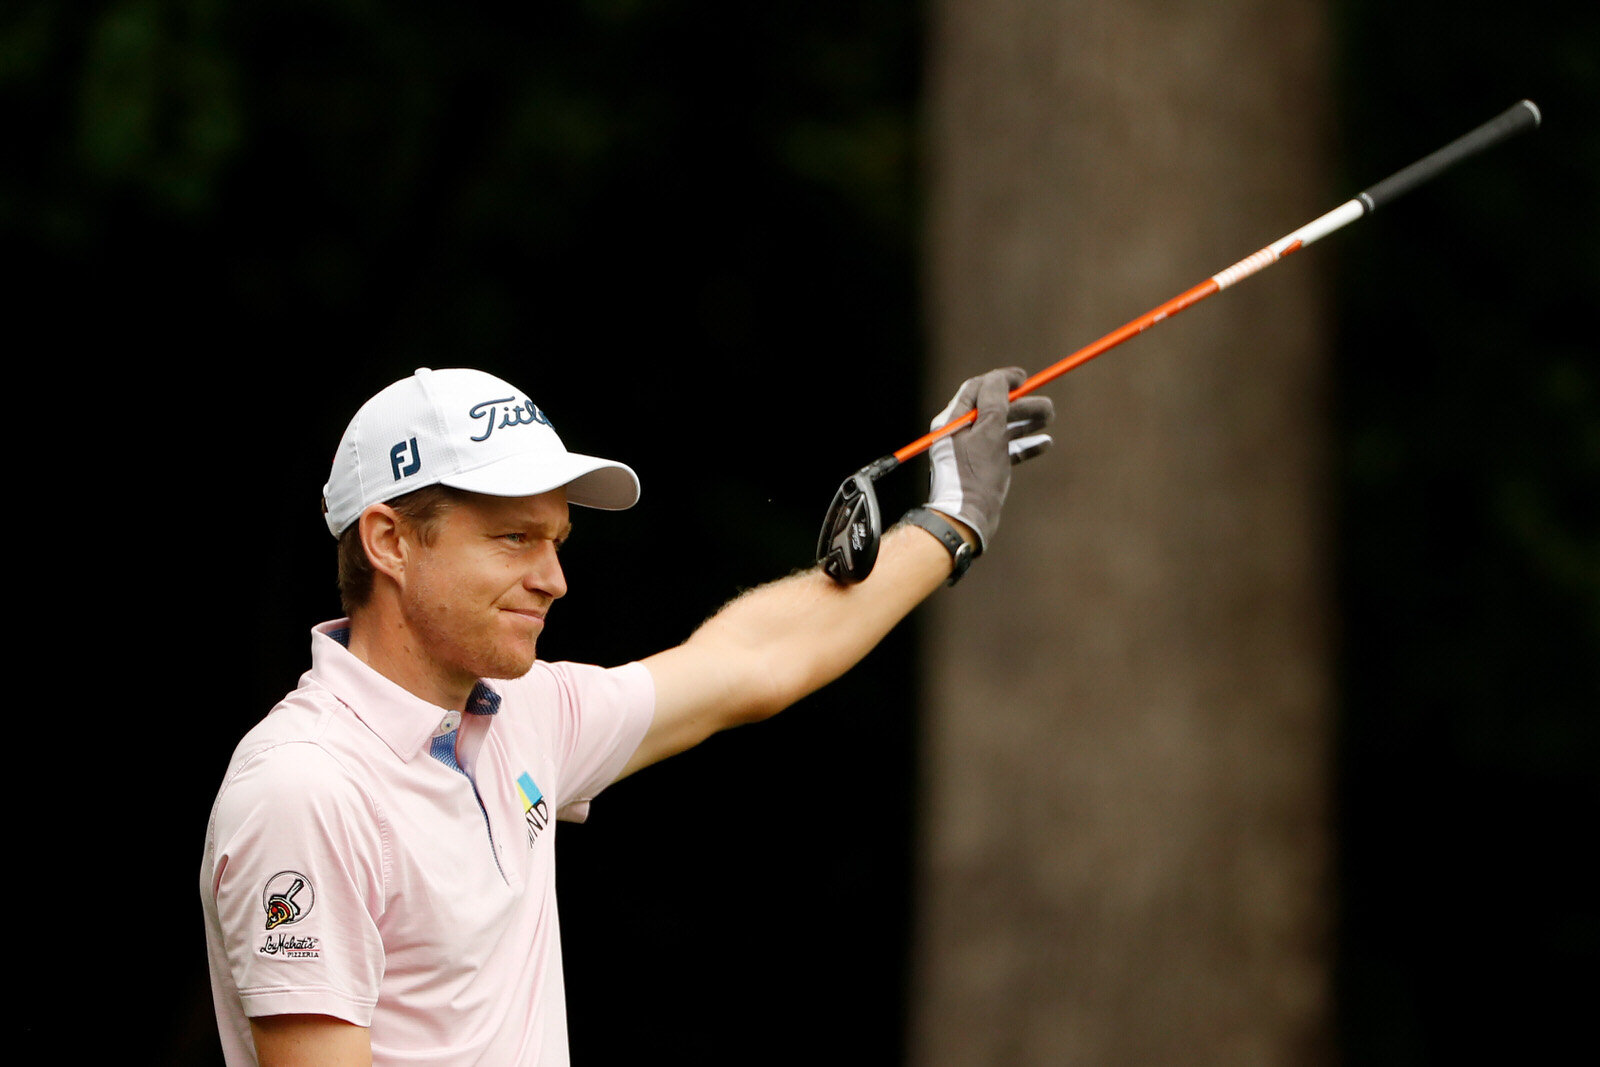  GREENSBORO, NORTH CAROLINA - AUGUST 15: Peter Malnati of the United States reacts to his shot from the second tee during the third round of the Wyndham Championship at Sedgefield Country Club on August 15, 2020 in Greensboro, North Carolina. (Photo 